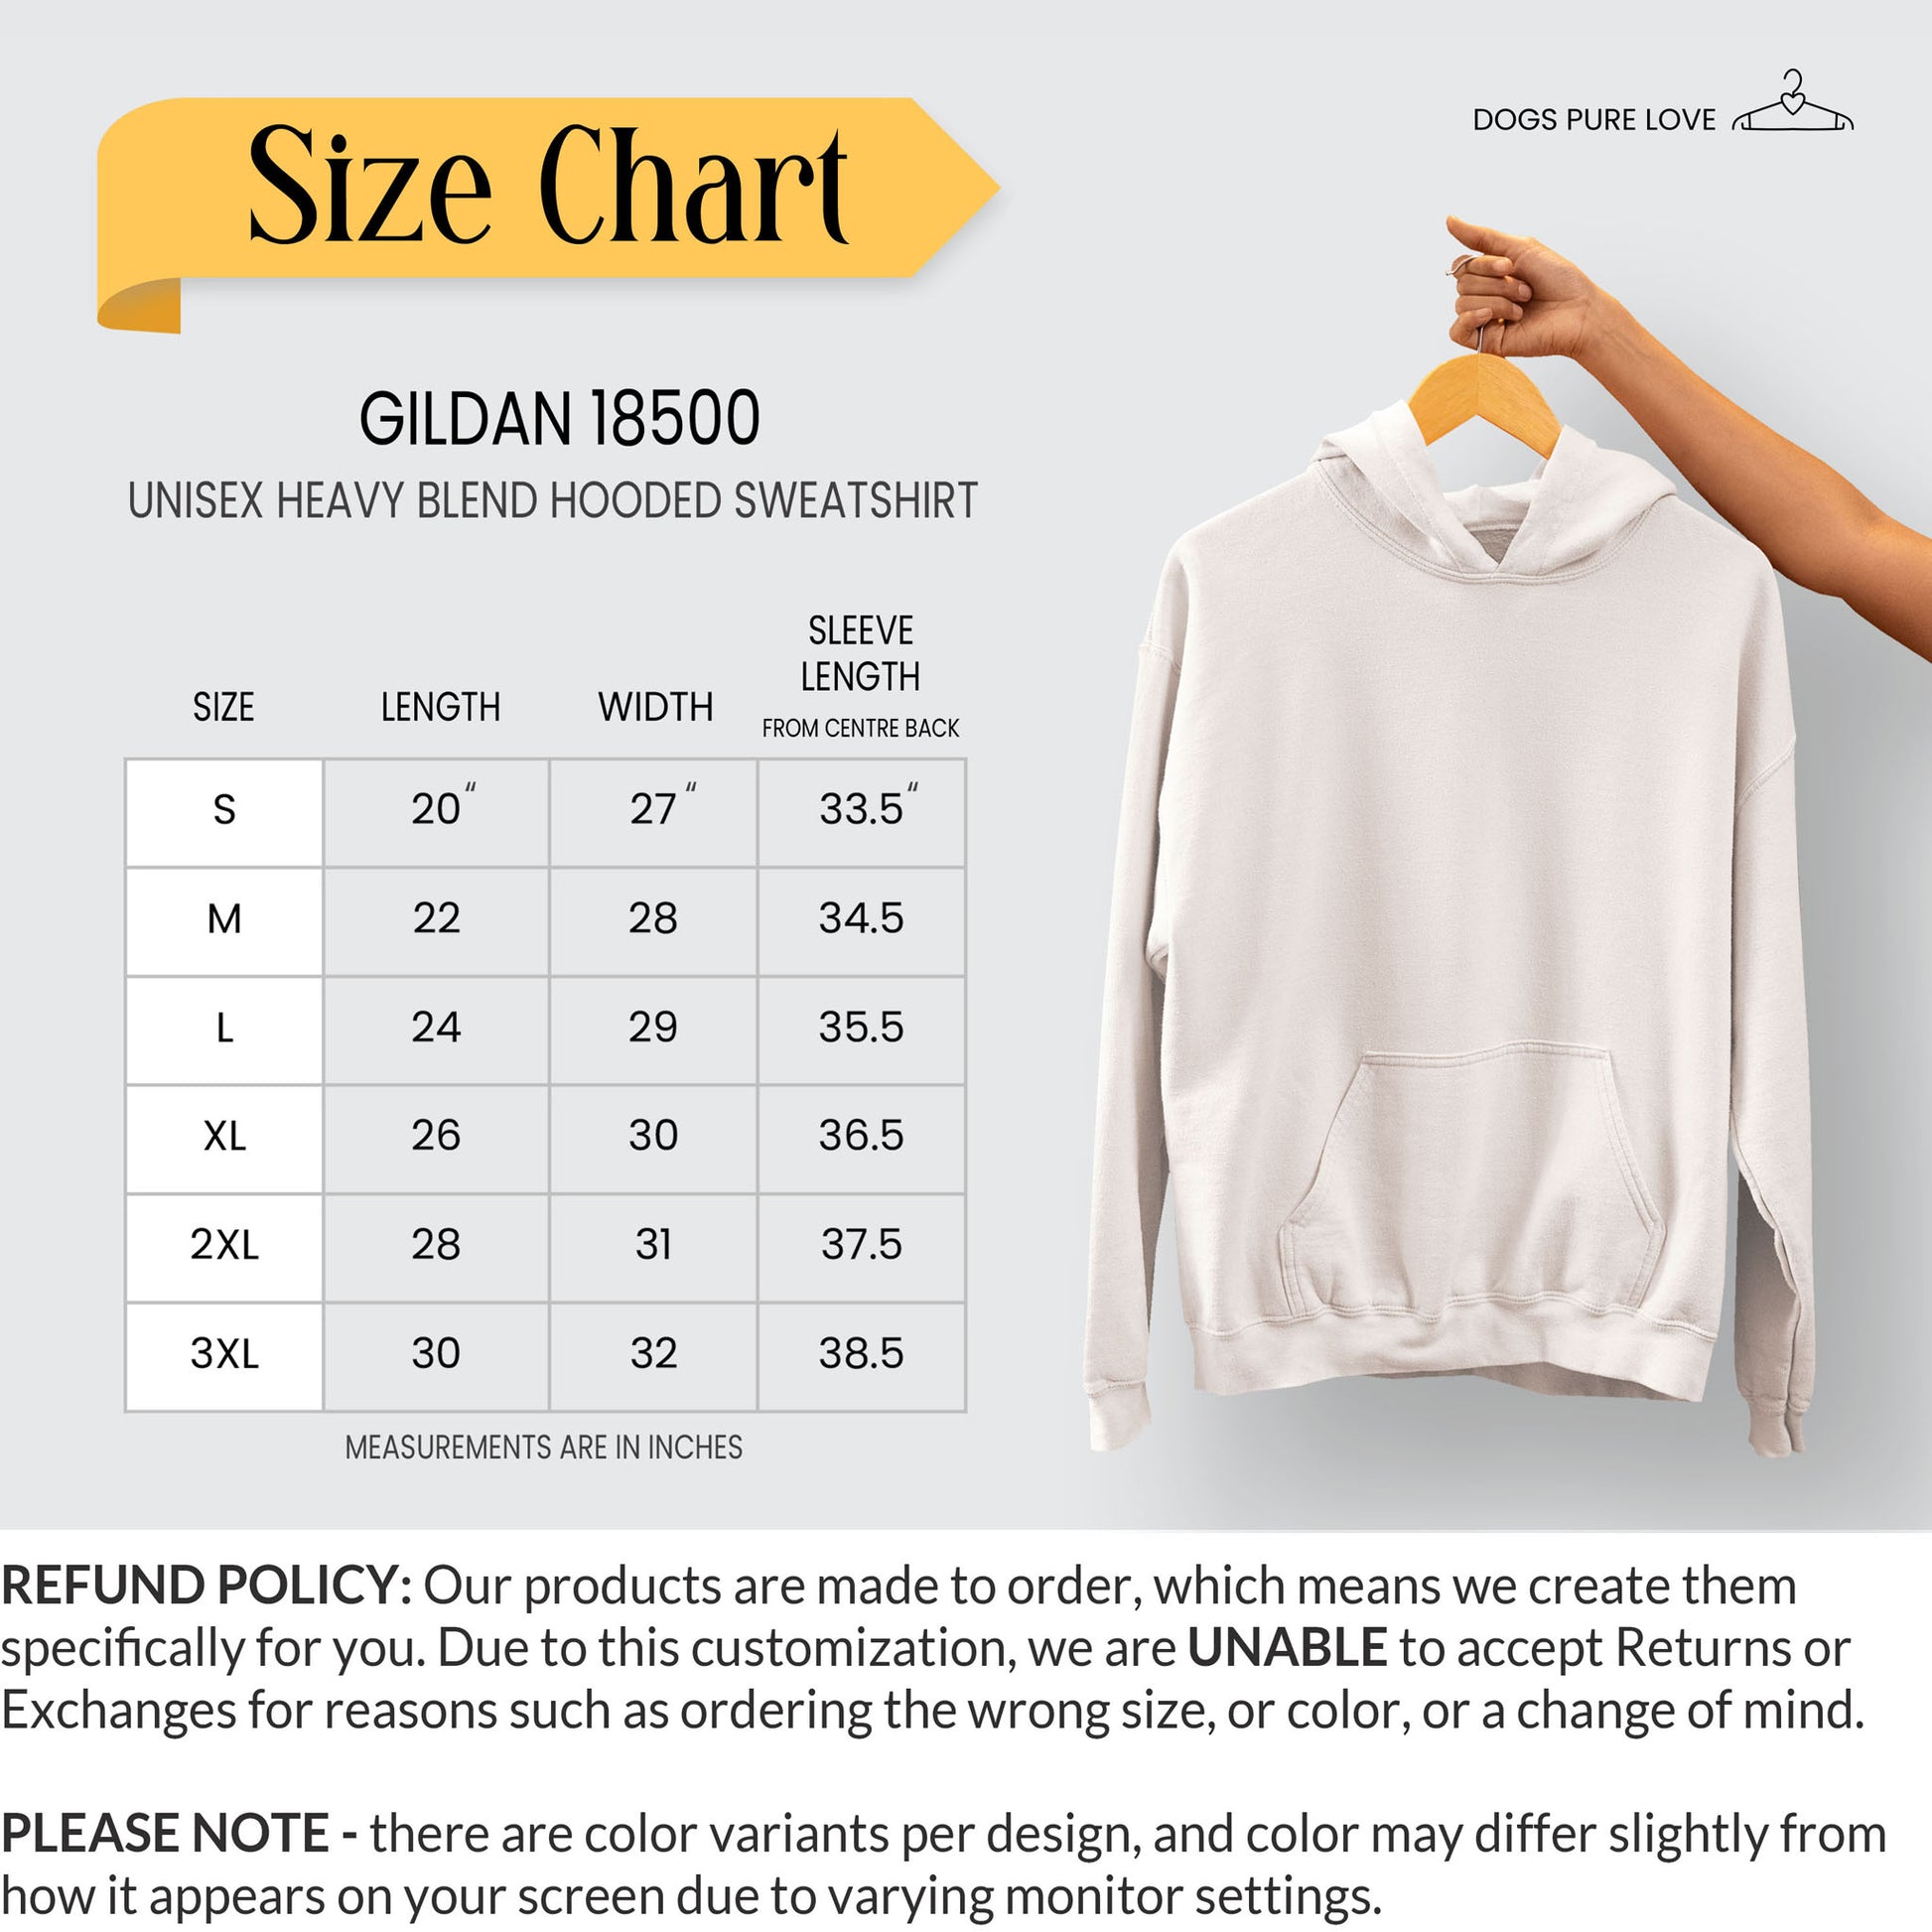 A tee size chart and refund policy description.